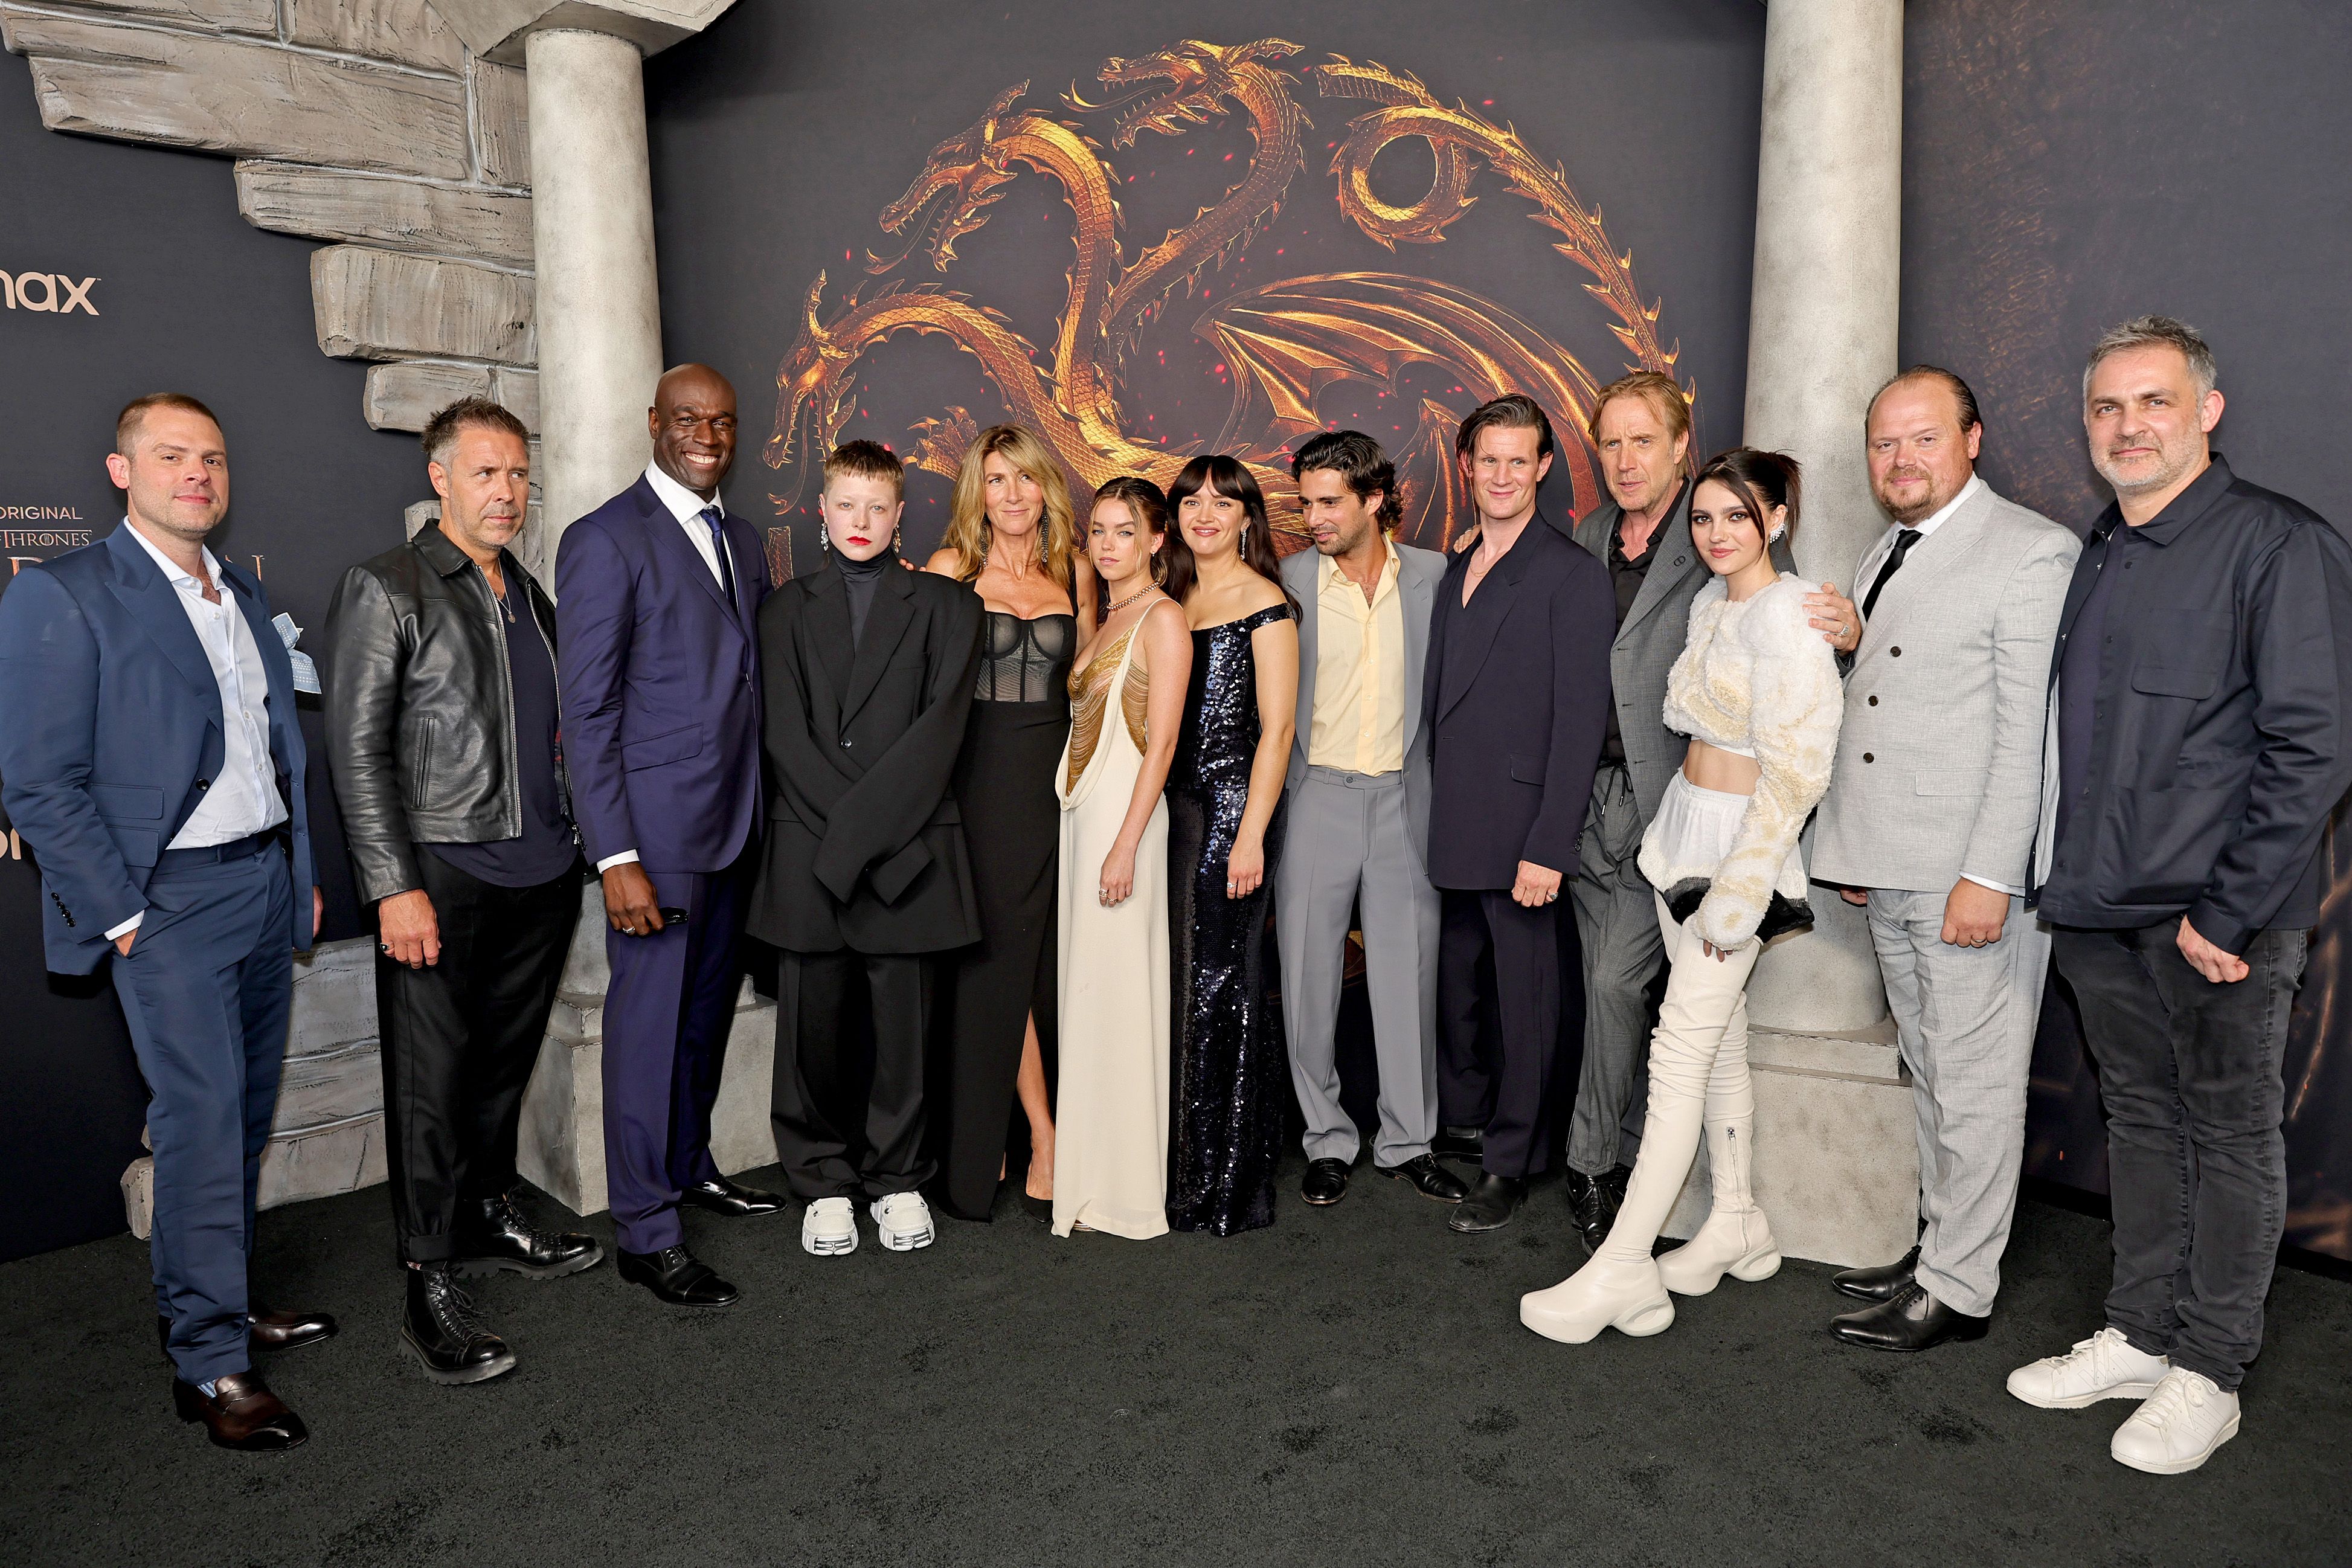 House of the Dragon season 2 release, cast plans, and what we know